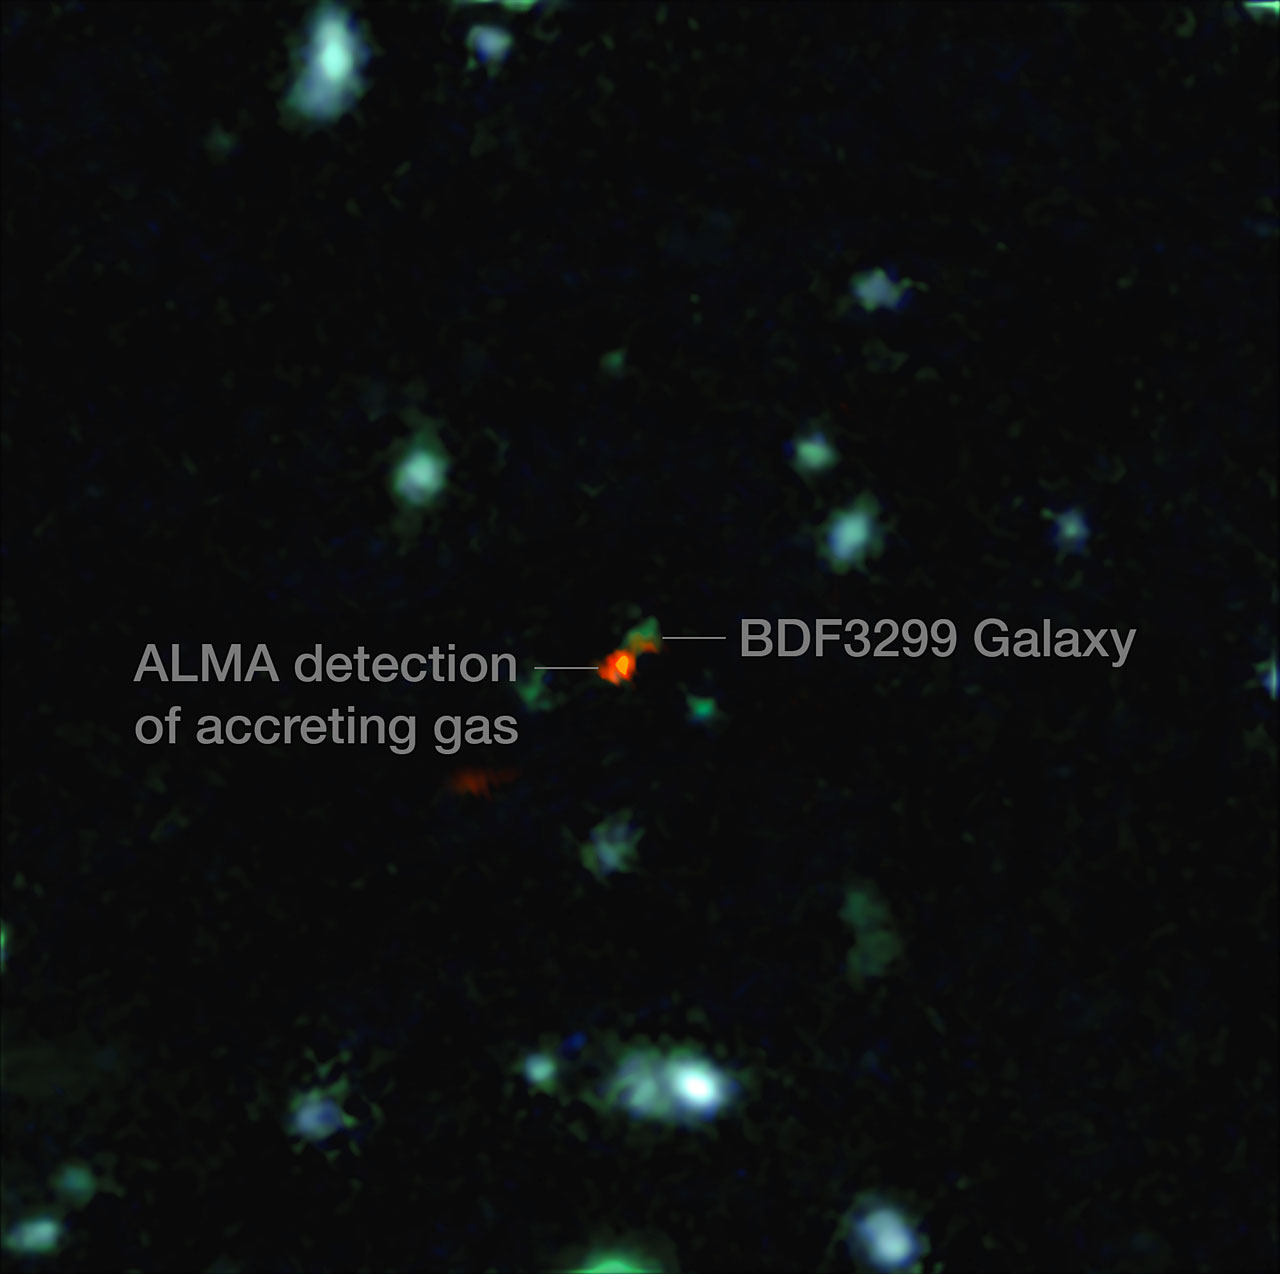 ALMA: assembly of galaxies in the early universe